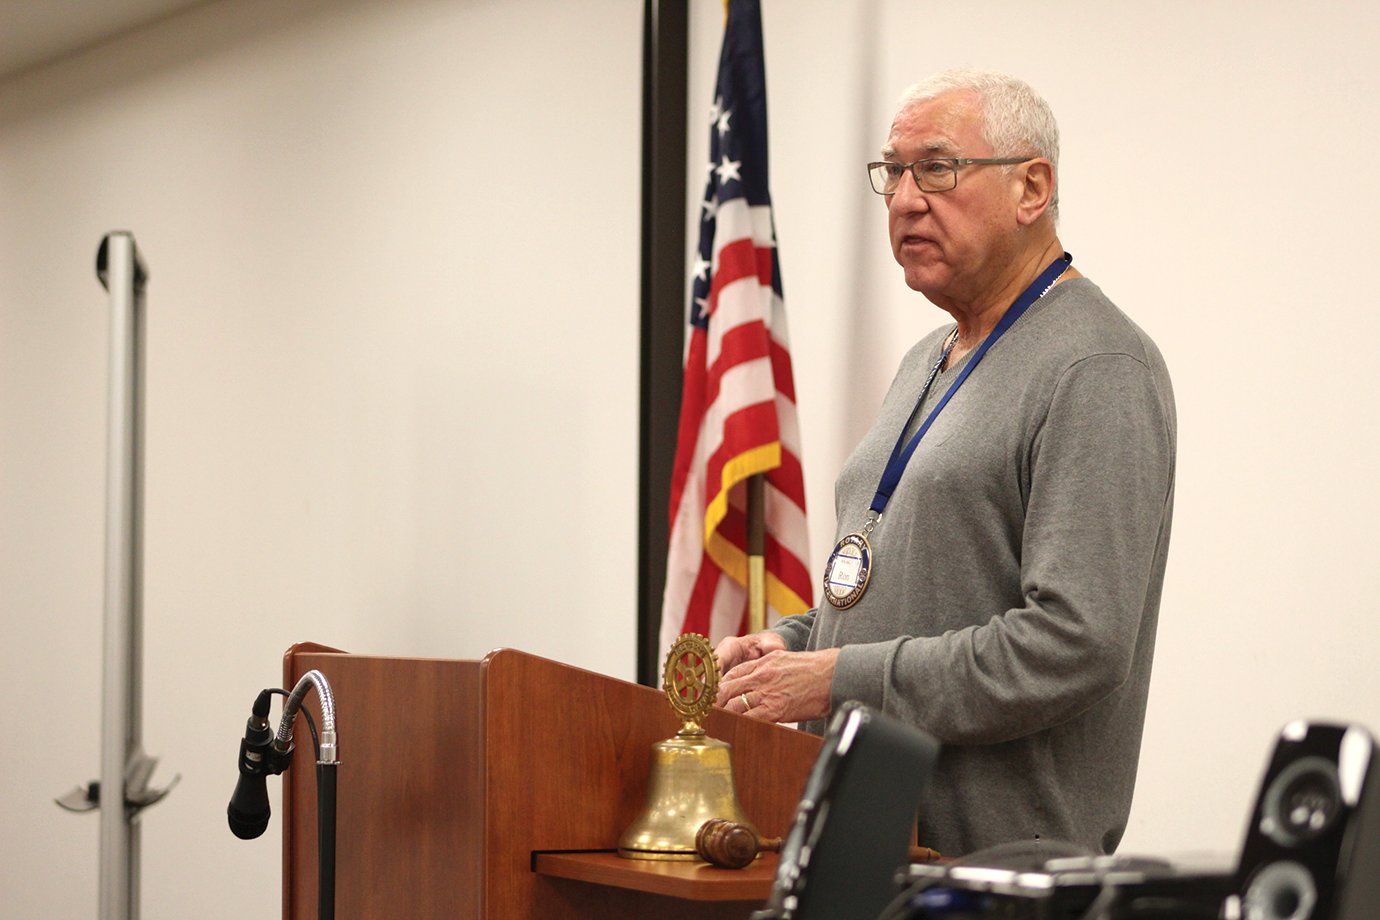 Rotarian Ron Hess discusses upcoming events for Rotary International’s 100-year anniversary Wednesday at the Crawfordsville District Public Library.